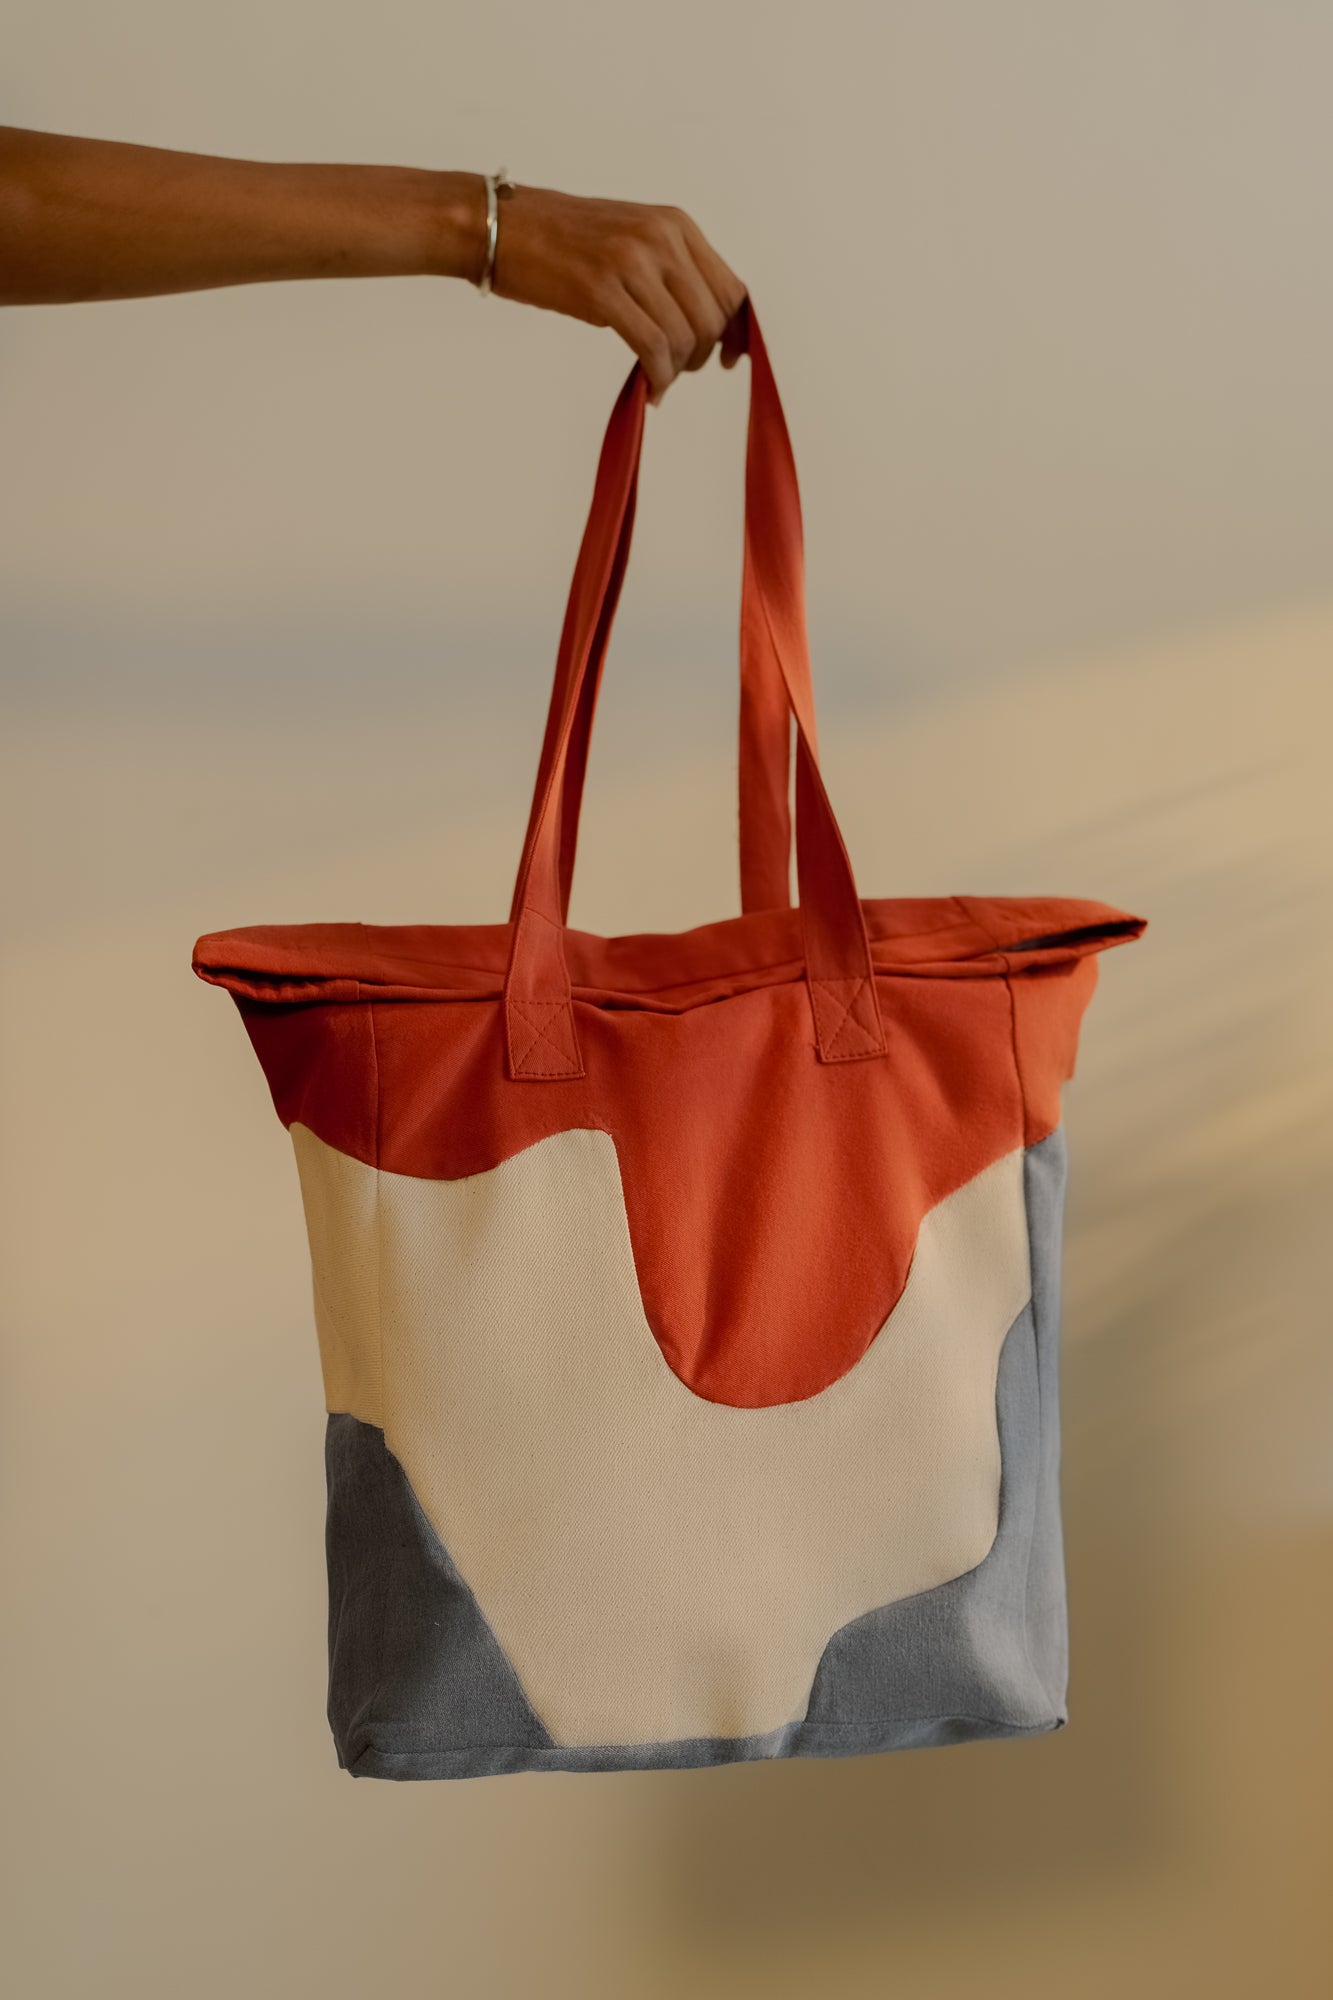 THE SPILL TOTE BAG